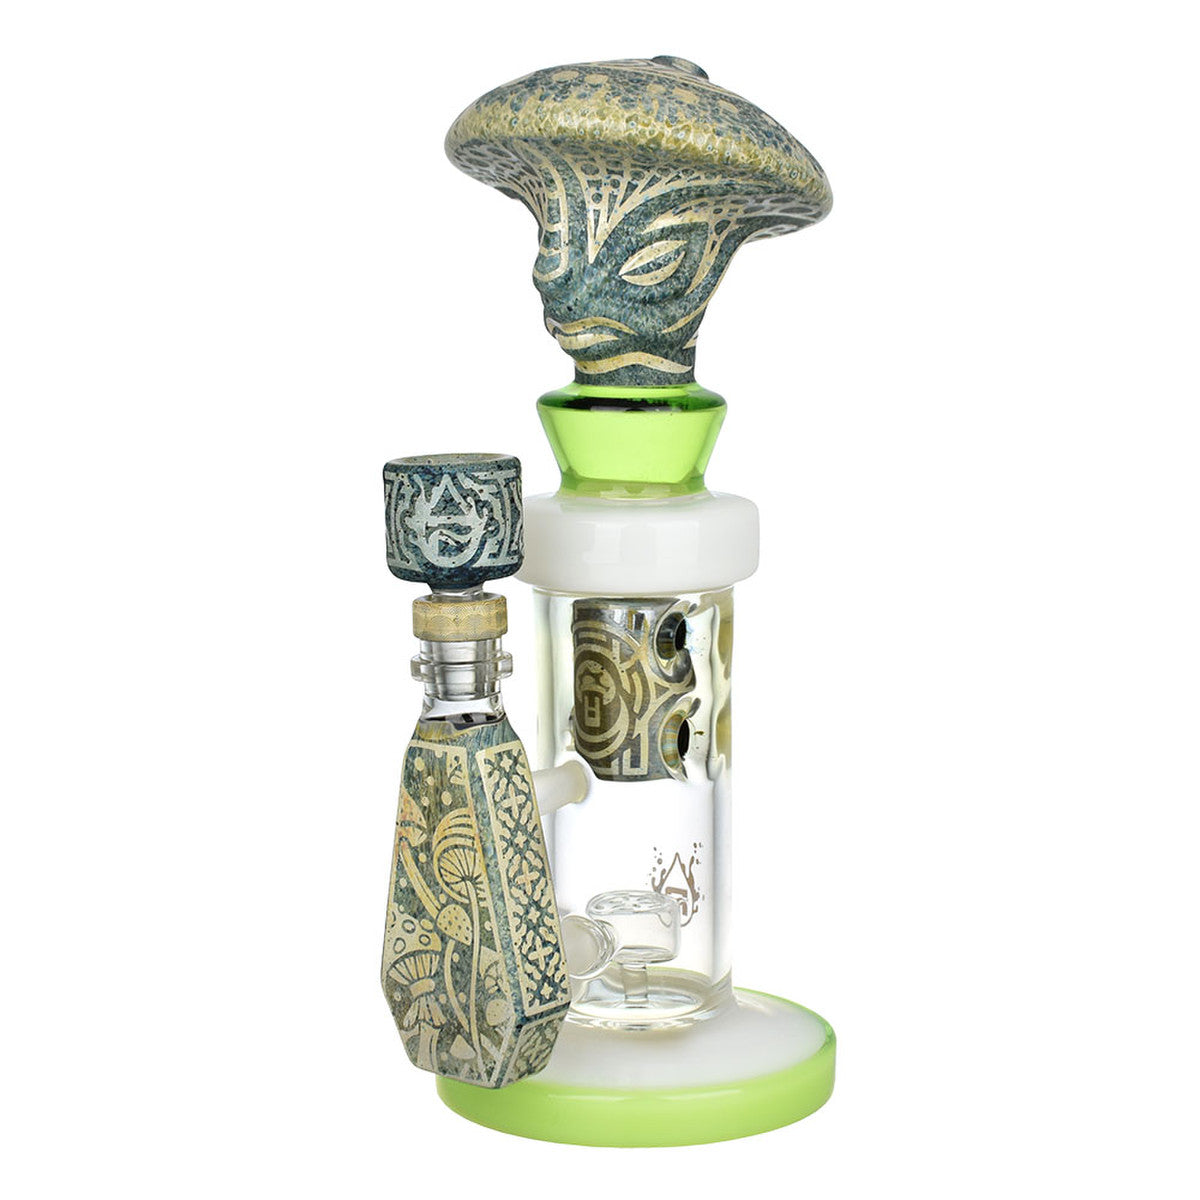 Pulsar Hieroglyphs Mushroom Wizard Water Pipe, 10.5", clear borosilicate glass, front view on white